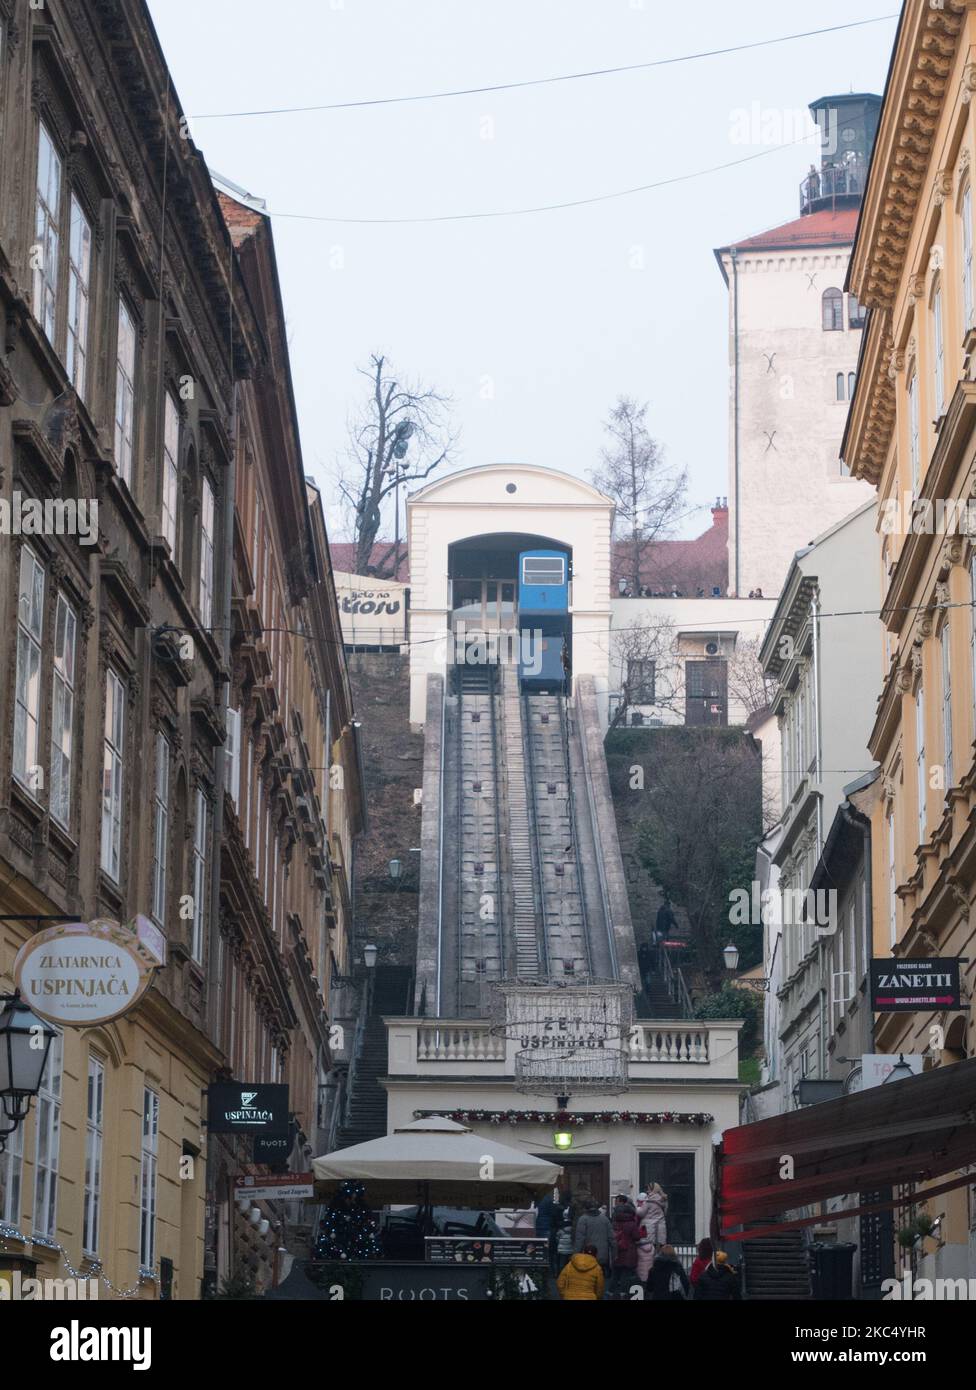 ZAGREB, CROATIA-January 4, 2020: The Zagreb Funicular in Tomic Street, connecting Ilica with Strossmayer promenade to the north. Its 66-metre track ma Stock Photo